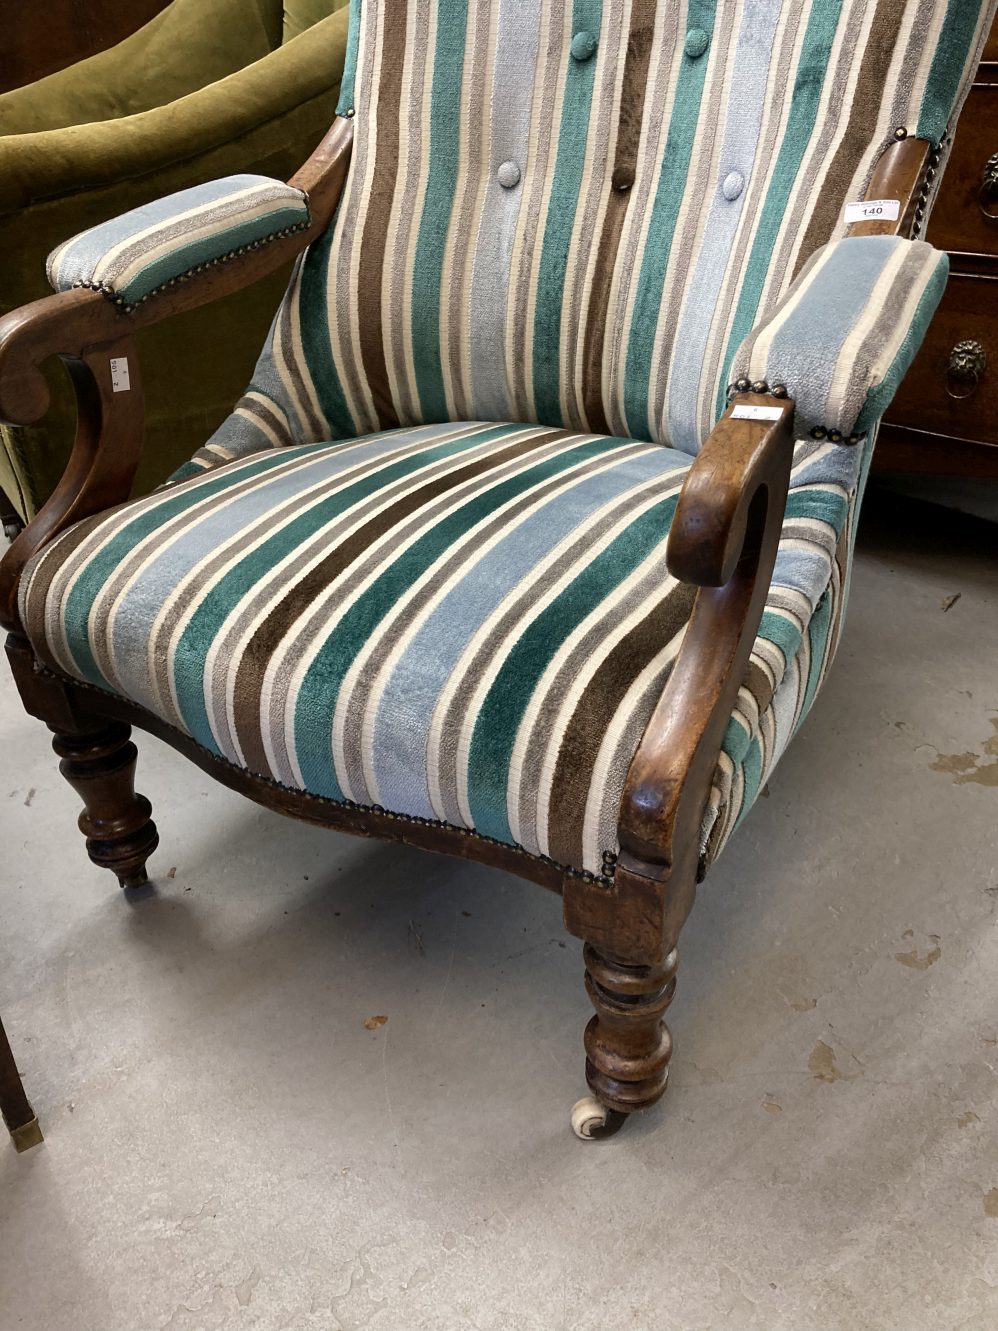 19th cent. Button back library armchair with scroll arms and turned legs on castors. 40ins. High. - Image 2 of 3